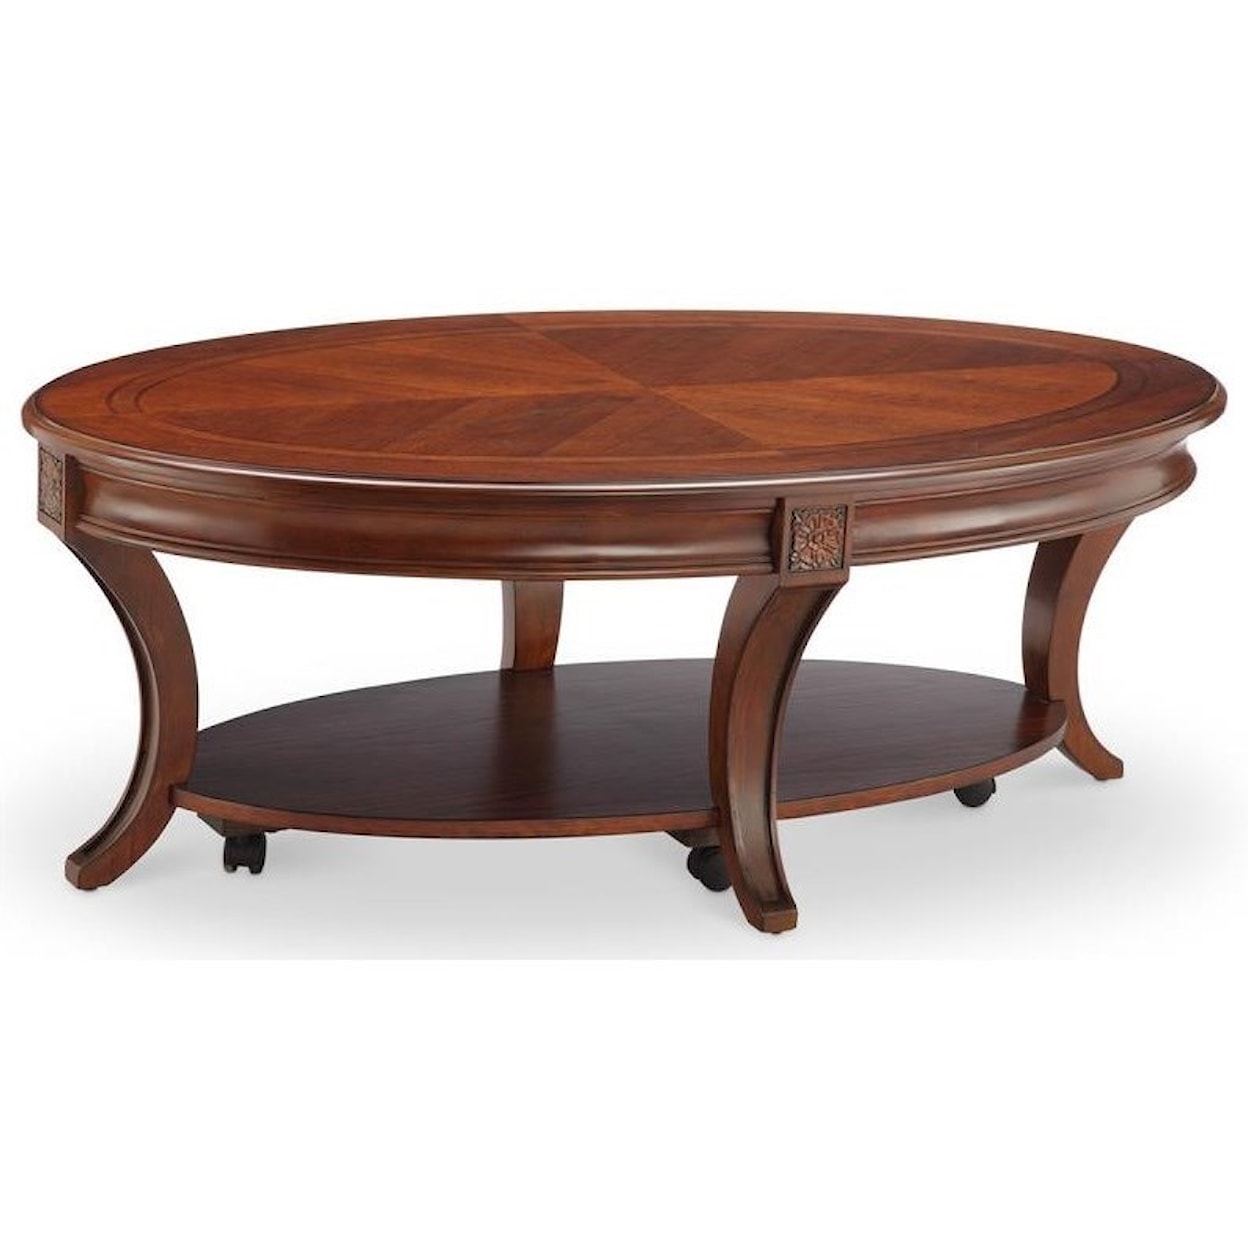 Magnussen Home Winslet Occasional Tables Oval Cocktail Table with Casters